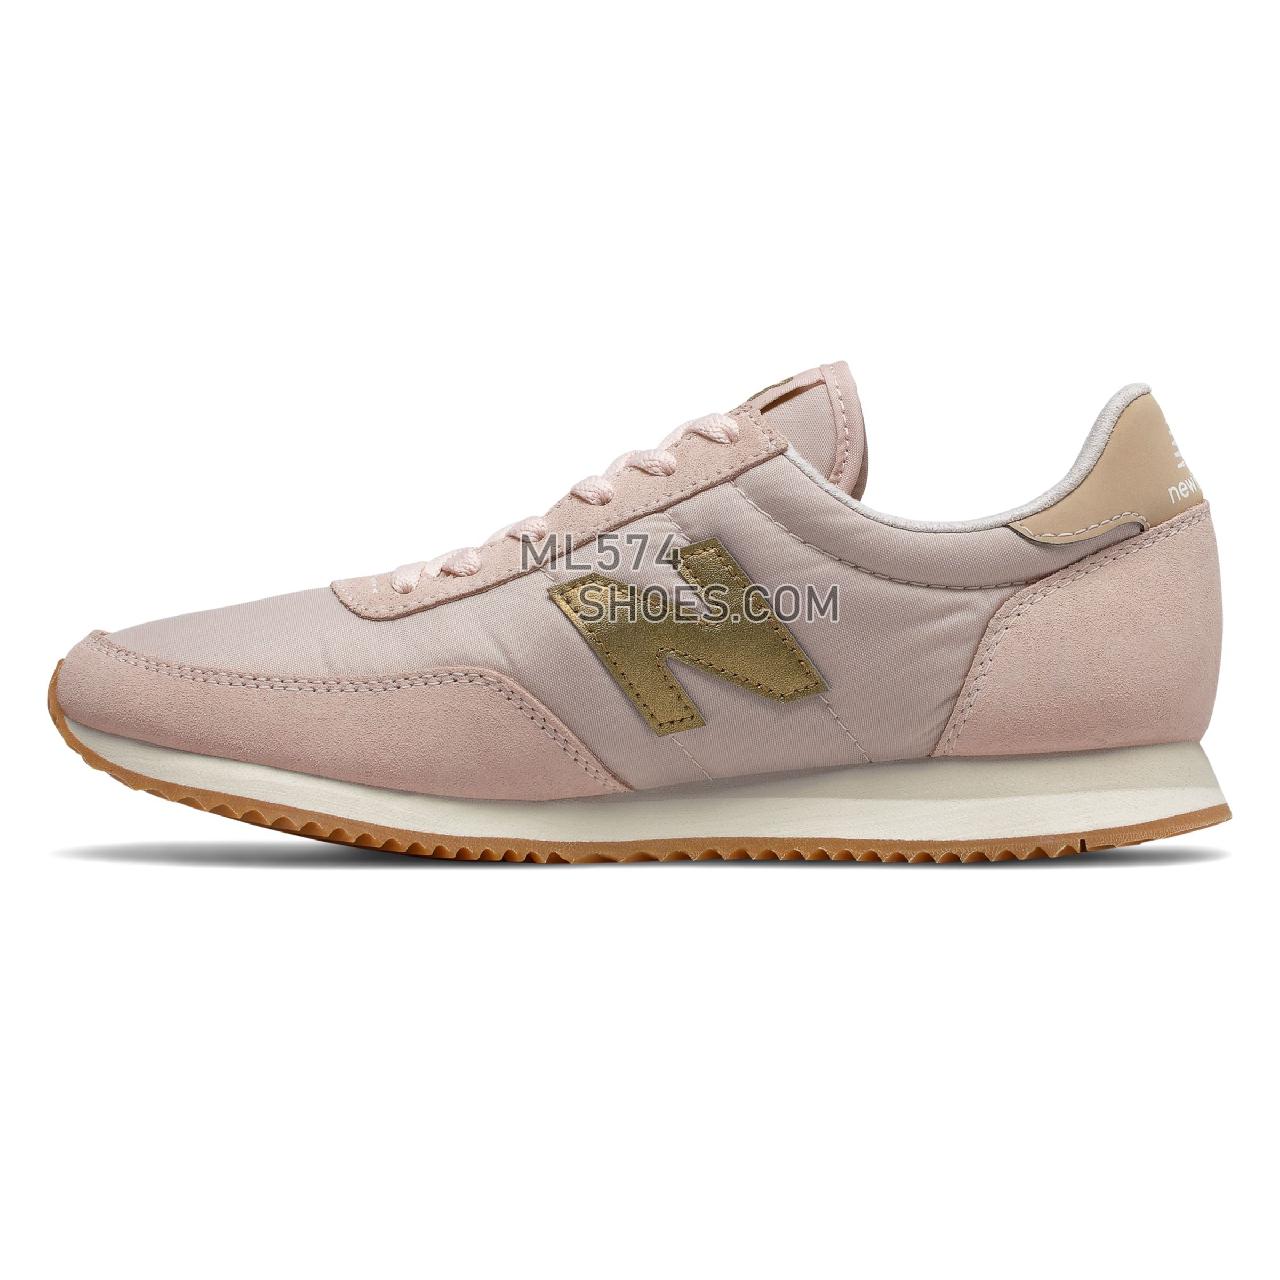 New Balance 720 - Women's Whats Trending - Smoked Salt with Classic Gold - WL720AC